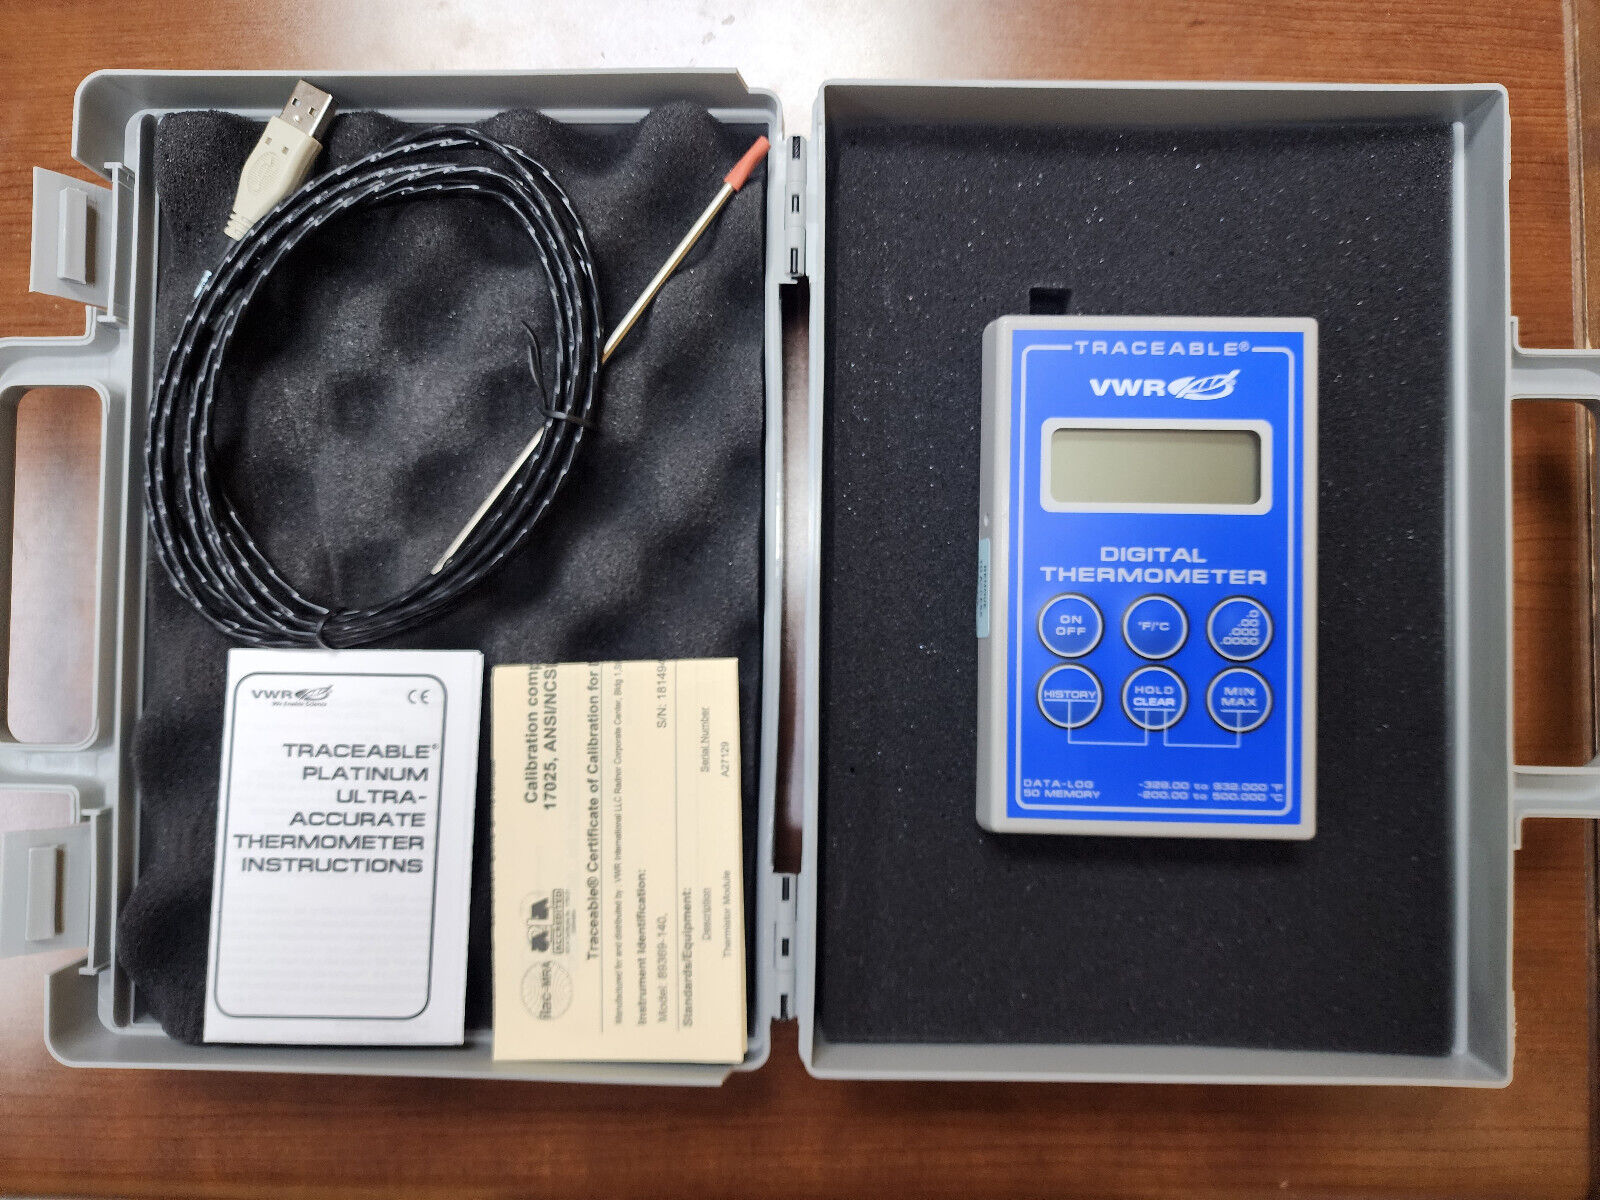 VWR® #89369-140 Traceable® Platinum Ultra-Accurate Digital Reference Thermometer